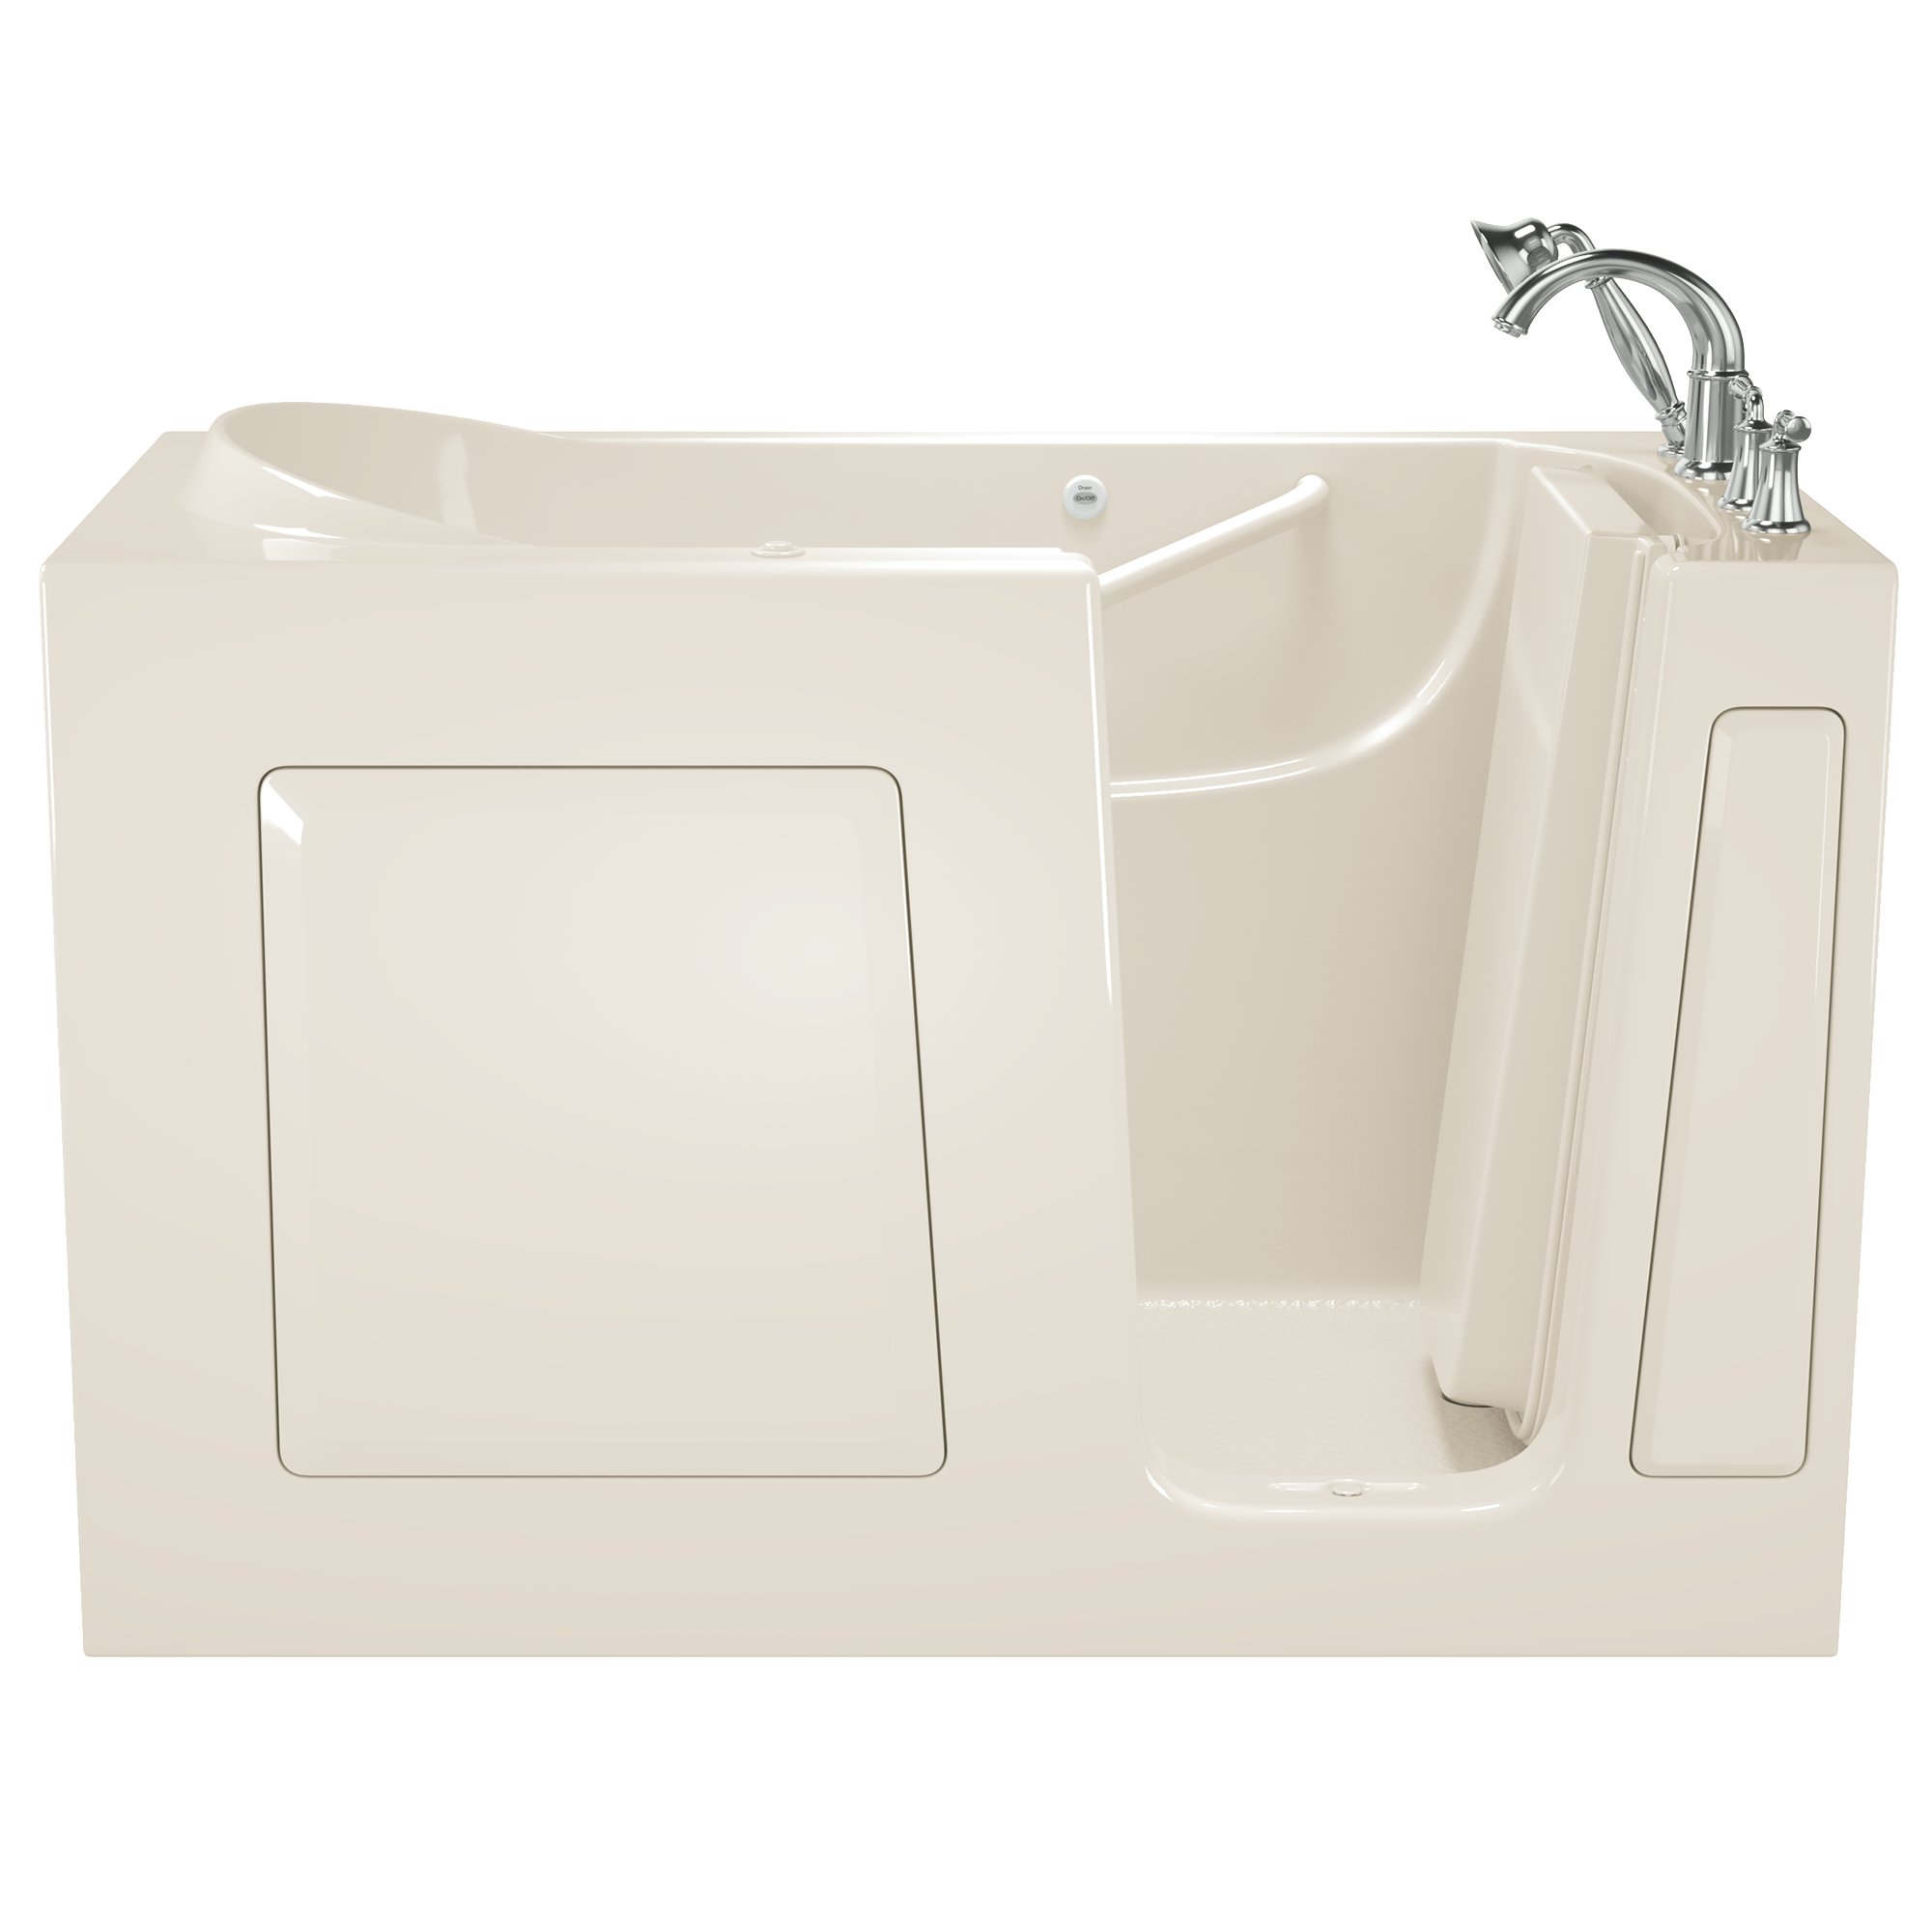 Gelcoat Value Series 30x60 Inch Walk-In Bathtub with Whirlpool Massage System - Right Hand Door and Drain